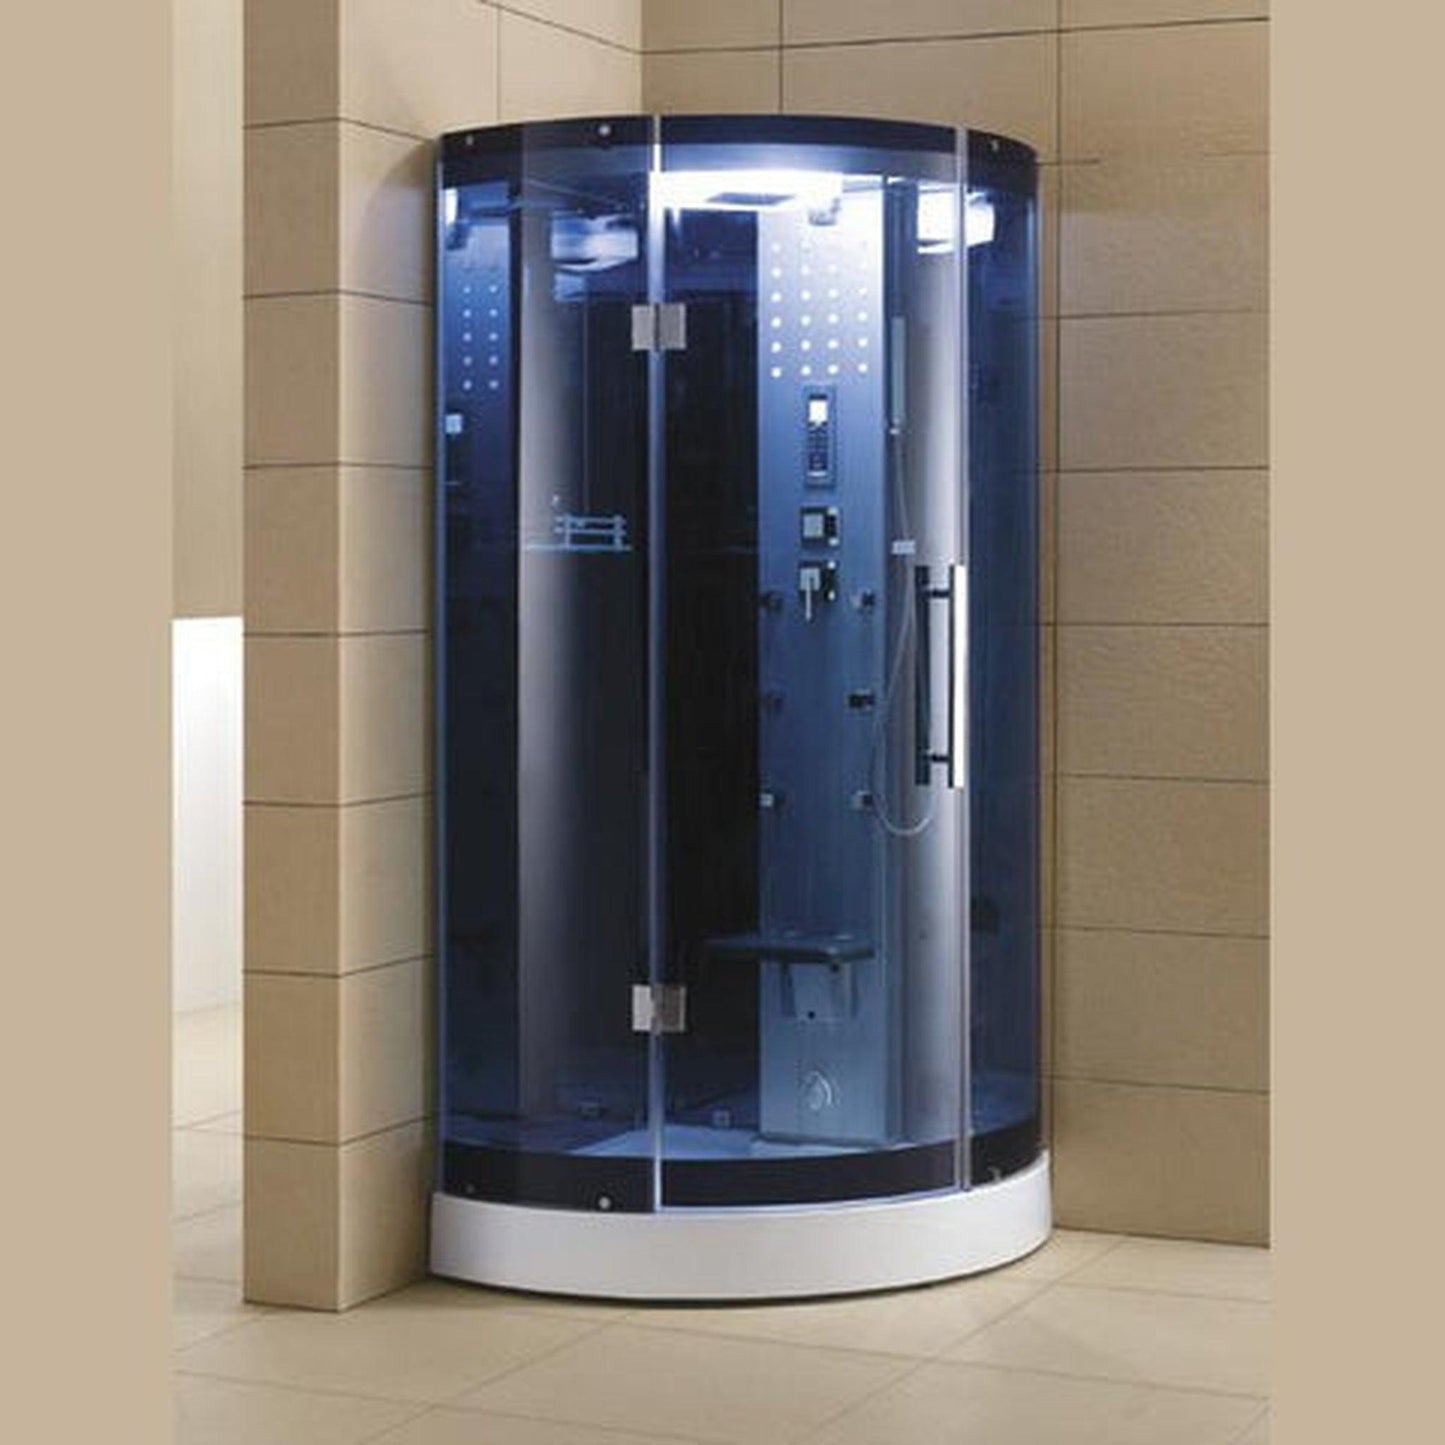 Mesa 38" x 38" x 85" Blue Tempered Glass Corner Steam Shower With 3kW Steam Generator, 6 Acupuncture Water Body Jets and Ozone Sterilization System